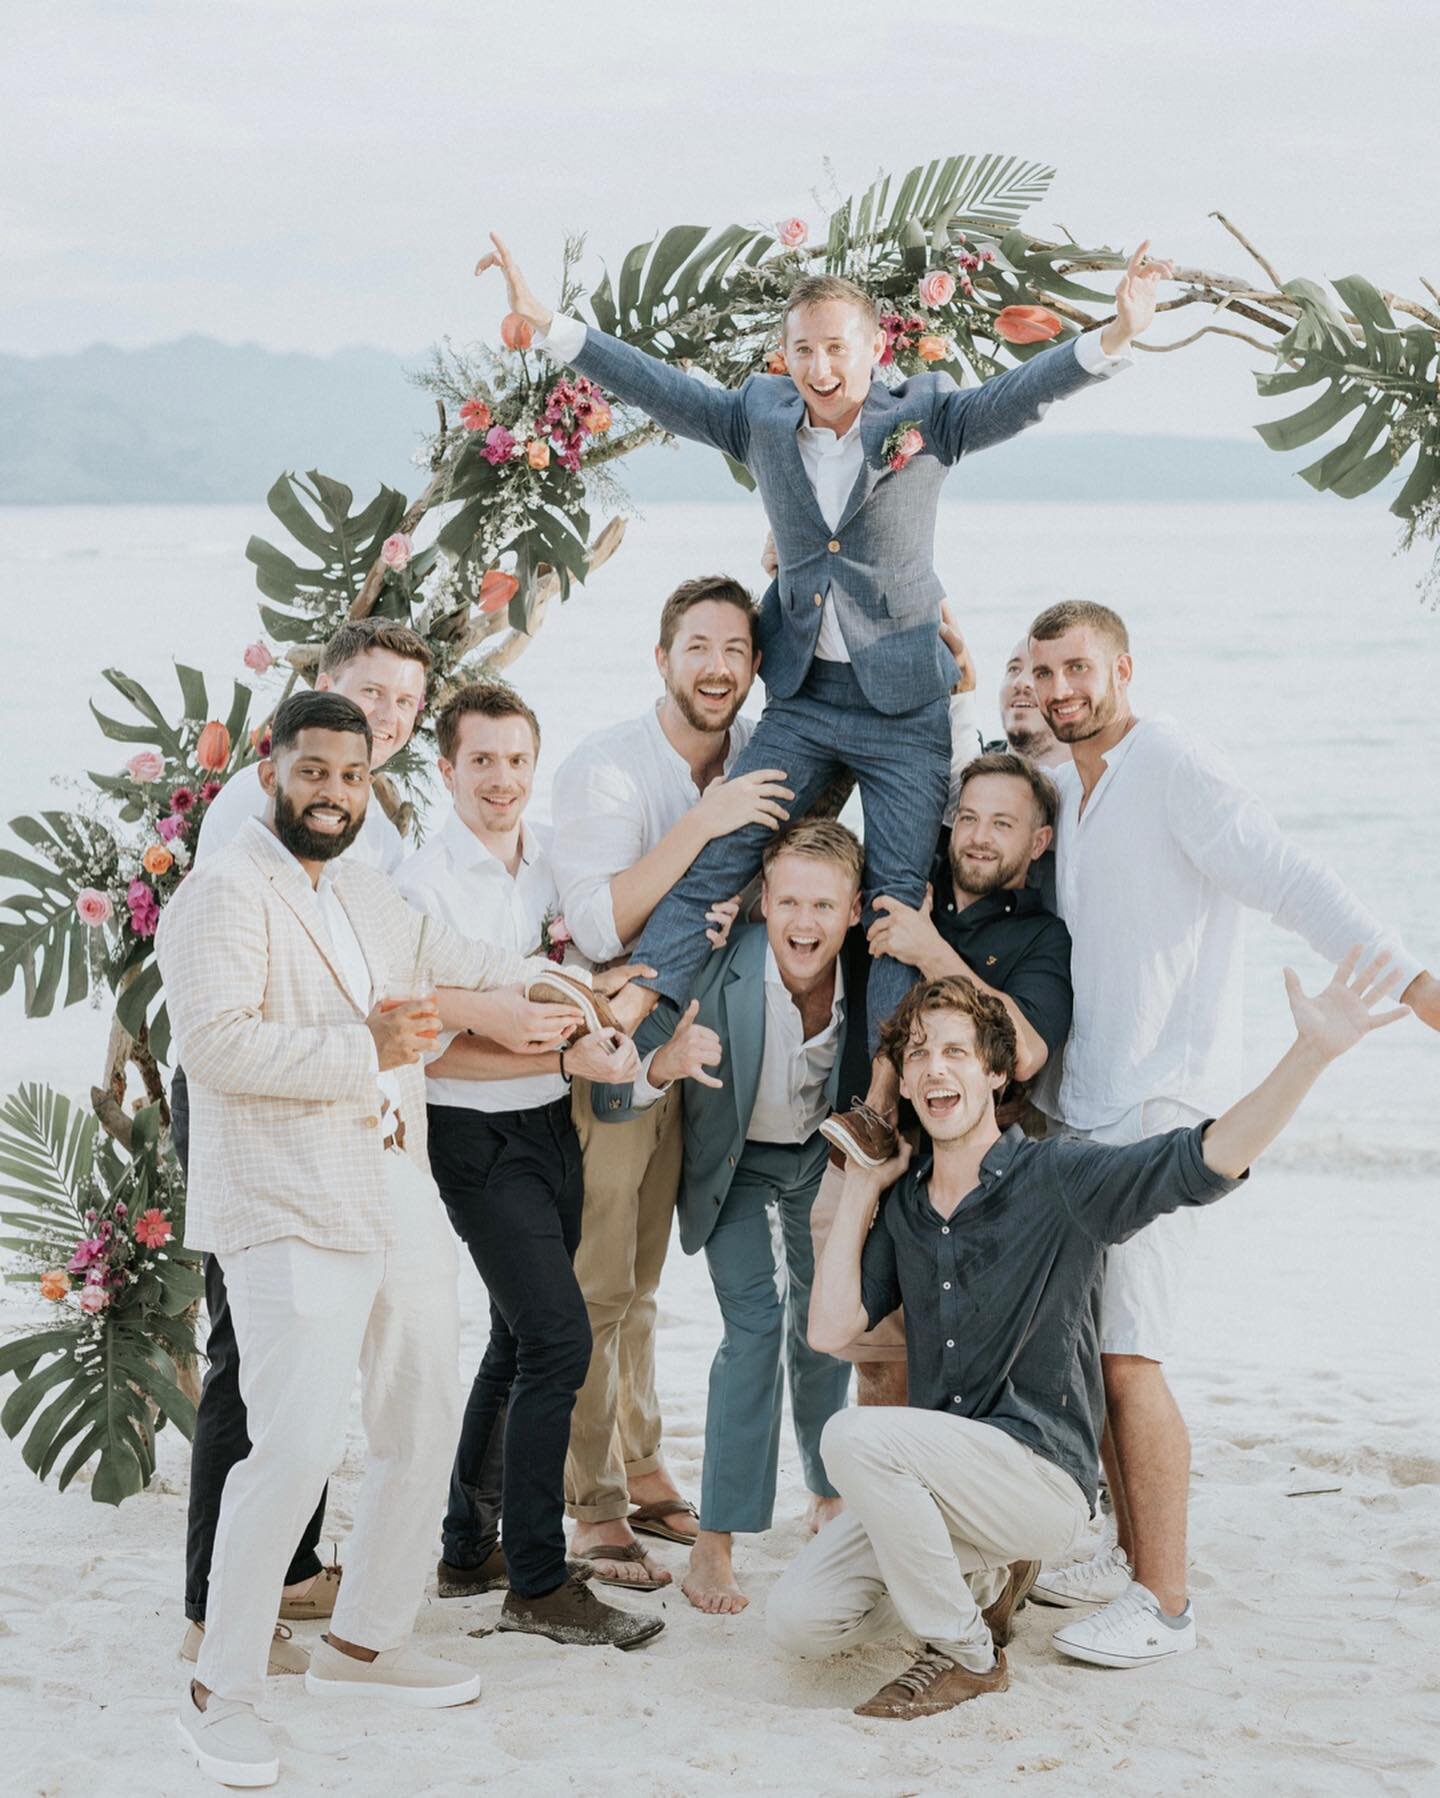 Hailing all the way from the UK to Lombok!
Lisa and Luke are a couple whose unique story has left me utterly inspired.

When they first booked me for their intimate wedding in the tropical paradise of Gili Trawangan, Lombok in 2019, I knew I was in f